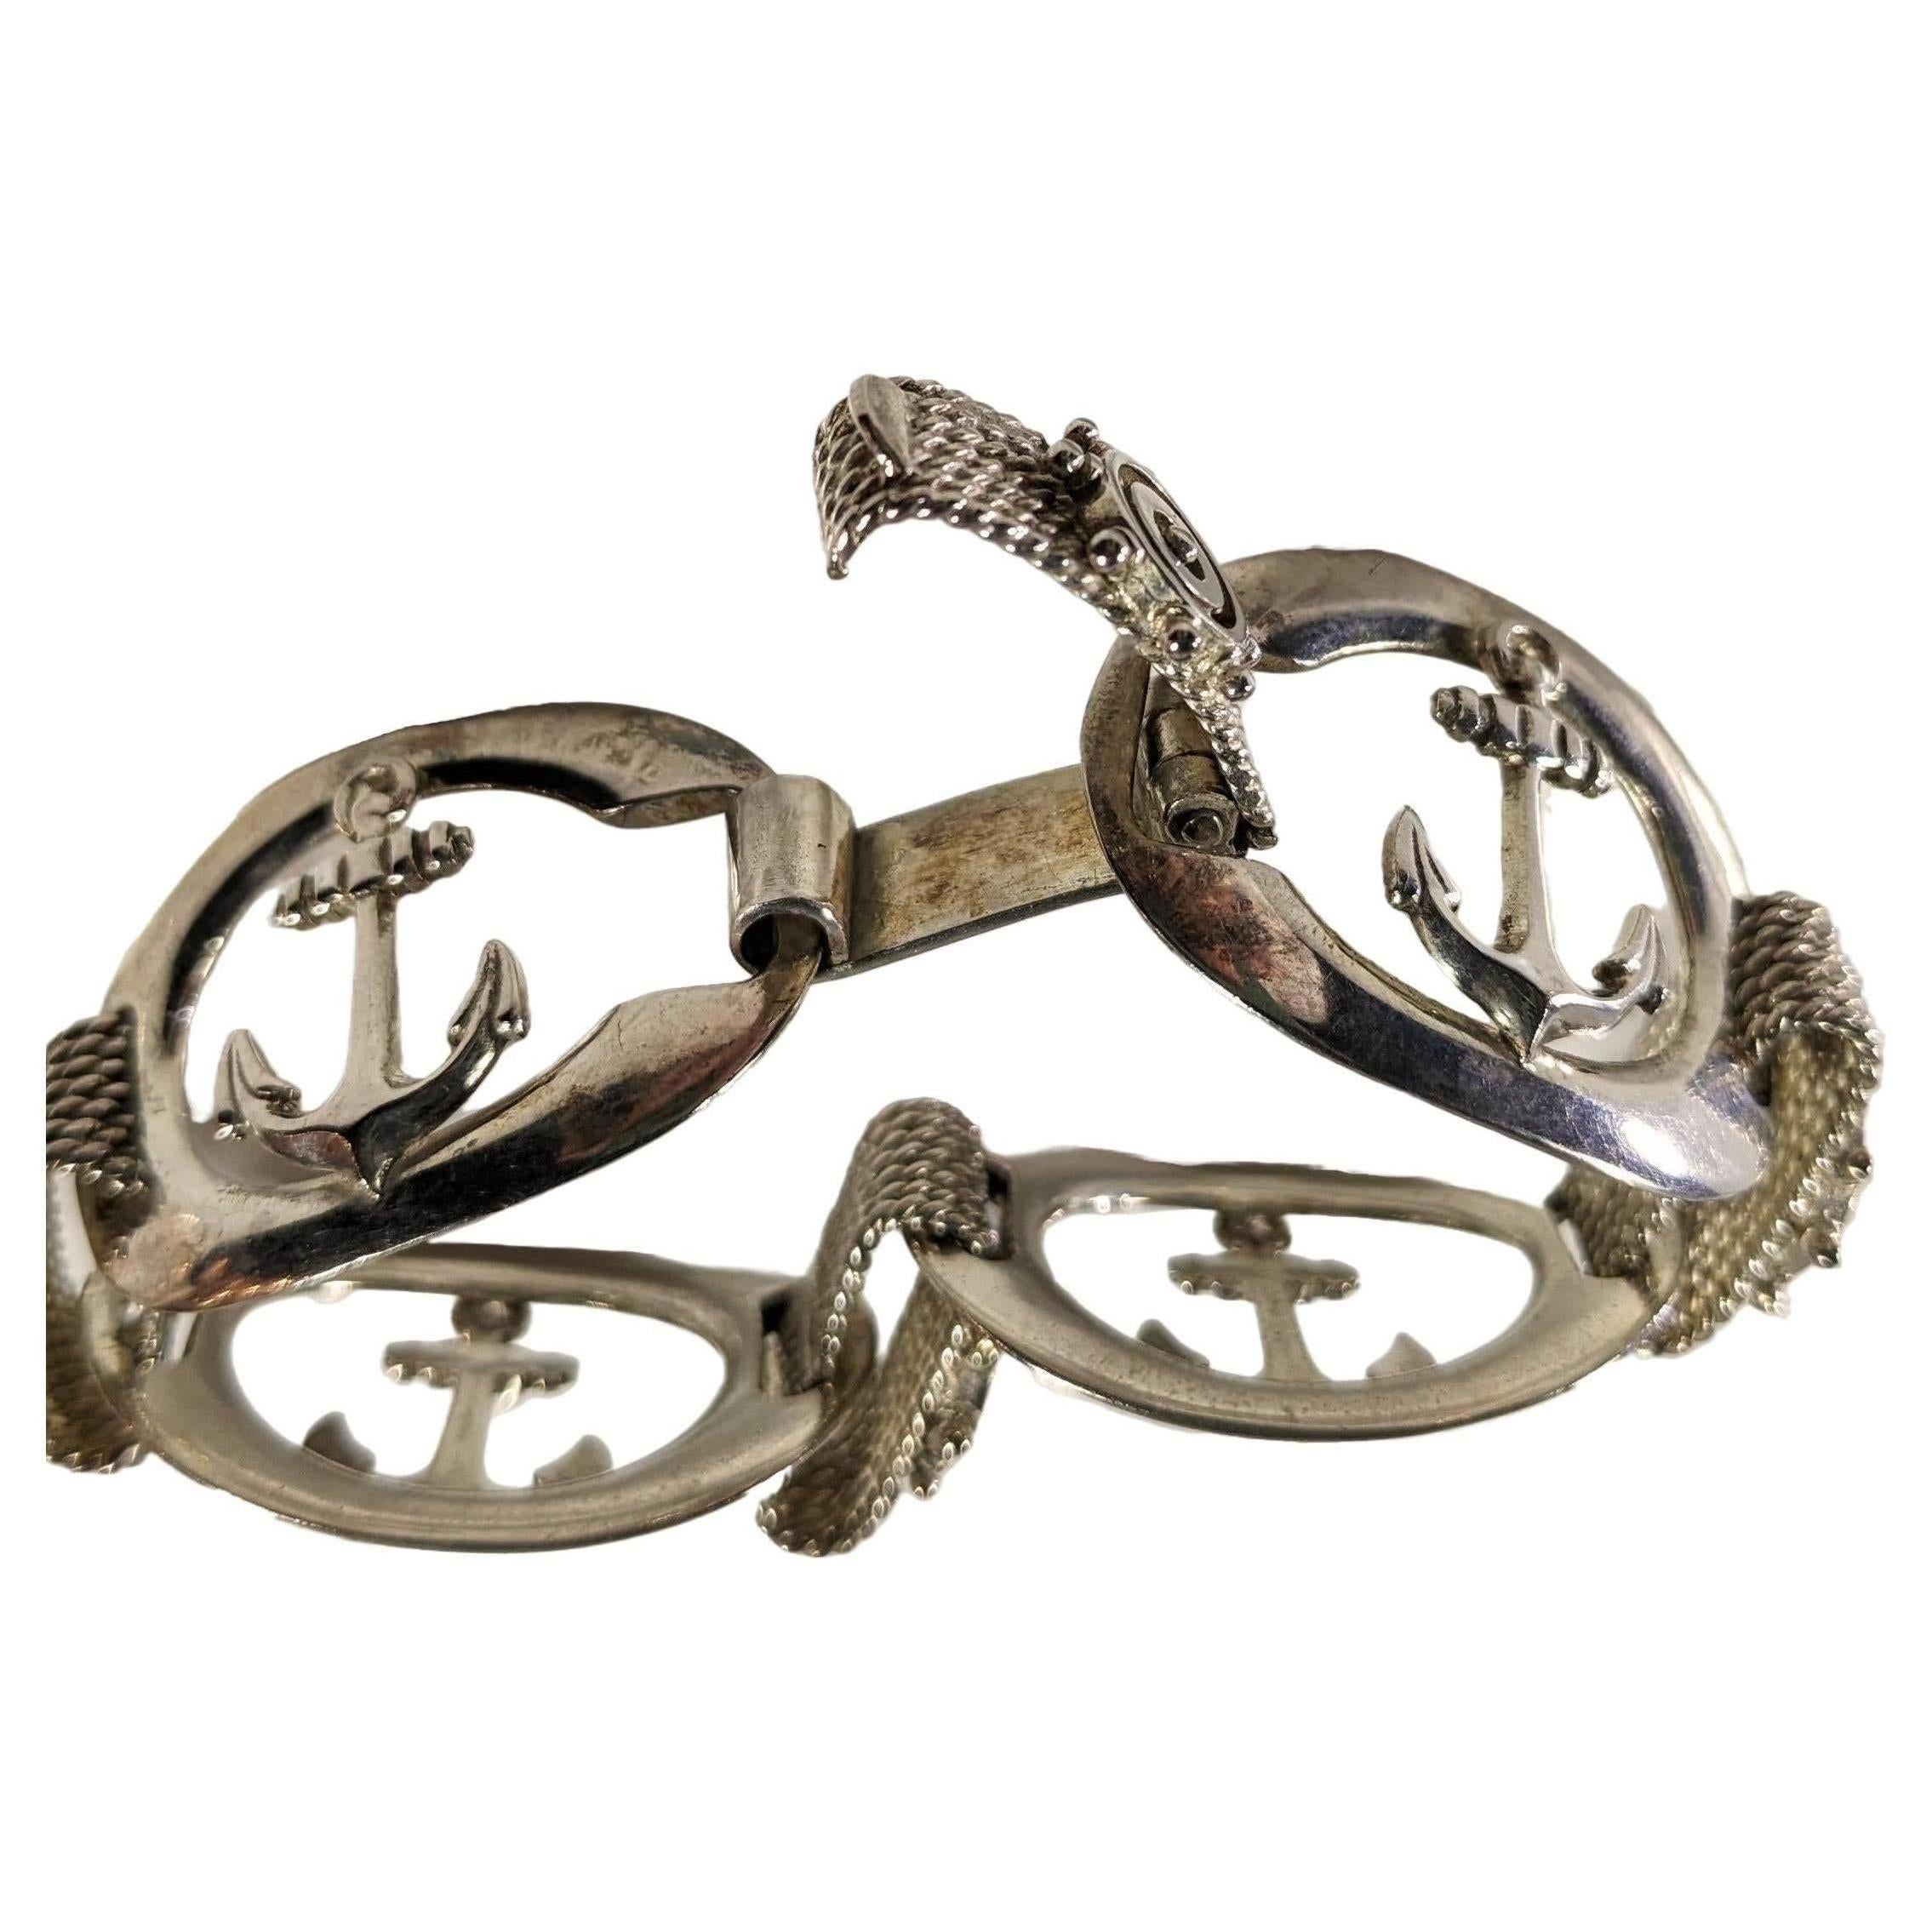 Vintage Silver Bracelet with Nautical Motifs  (Rudders and Anchors)
 It measures 20 cm (7,87 inches) in length and has a safety closure. It weighs  41 grams.

READY TO SHIP
*Shipment of this piece is not affected by COVID-19. Orders